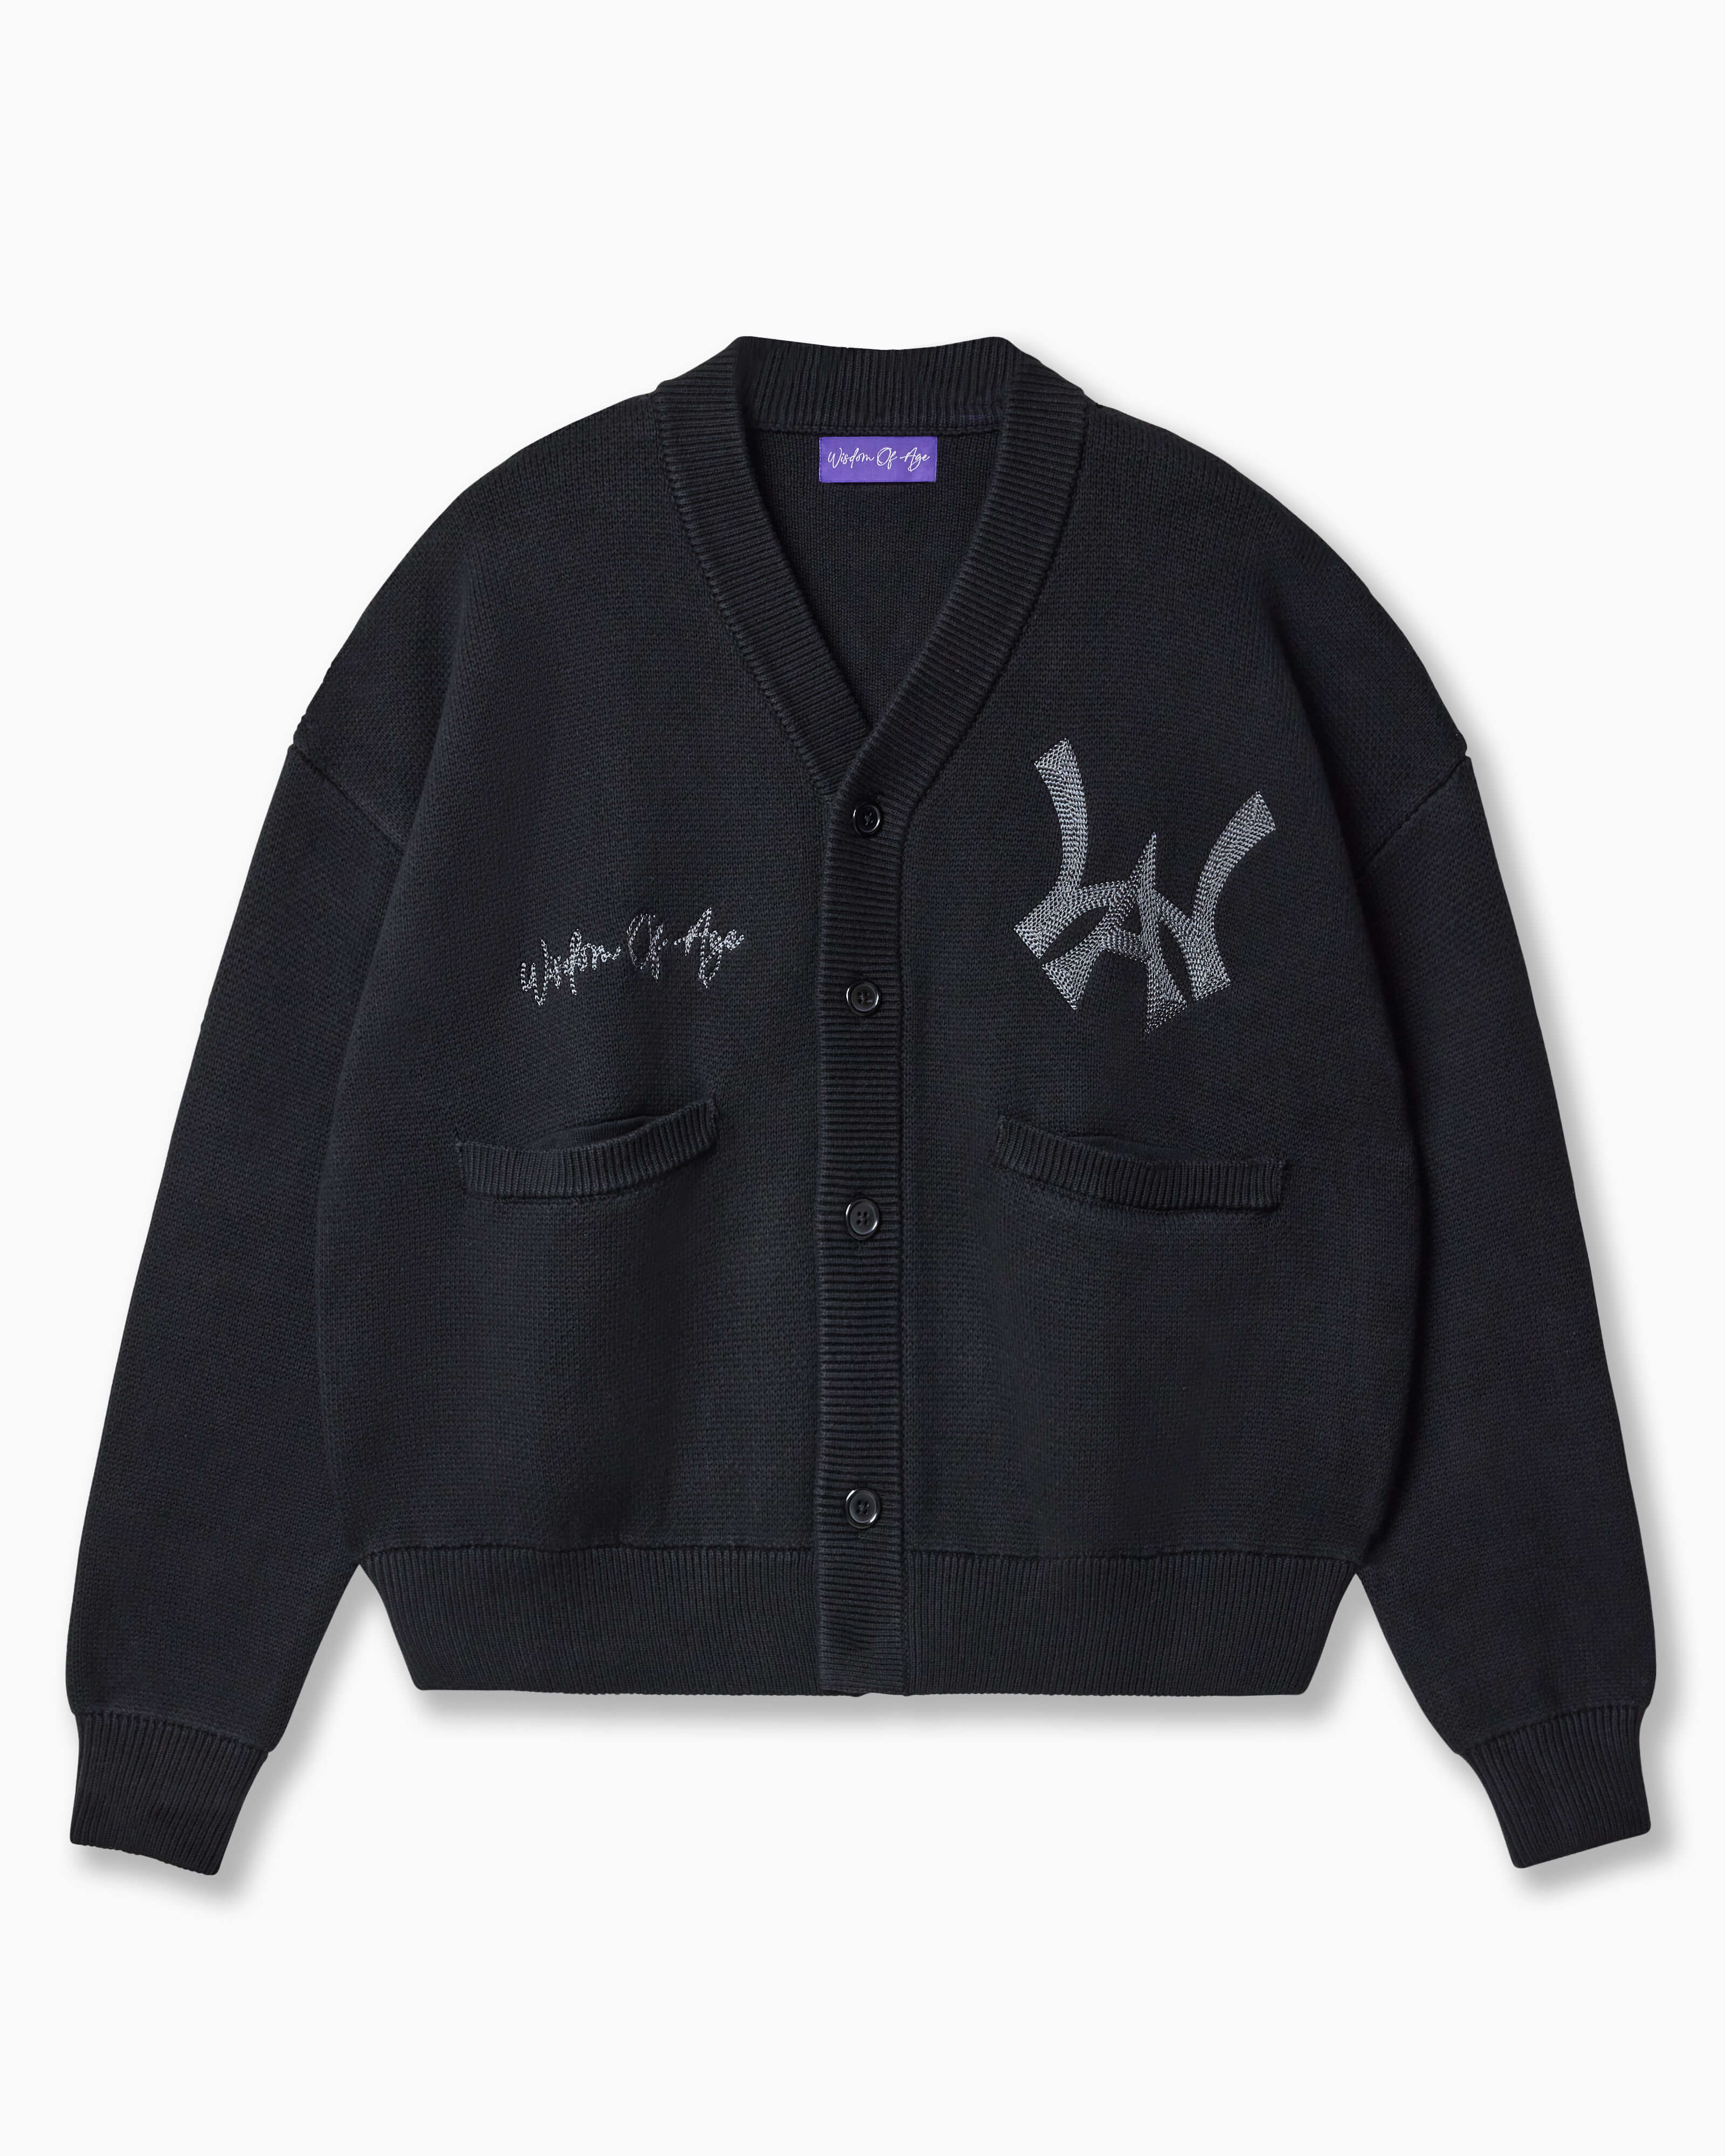 Wisdom of Age Black City Cardigan, Black Cat color wave with the WOA symbol on the top left side of the chest and the brand name “Wisdom of Age” written in script cursive on the upper right side. Two drop-in slip pockets on both sides and a 4 button placket with a v-neck drop.